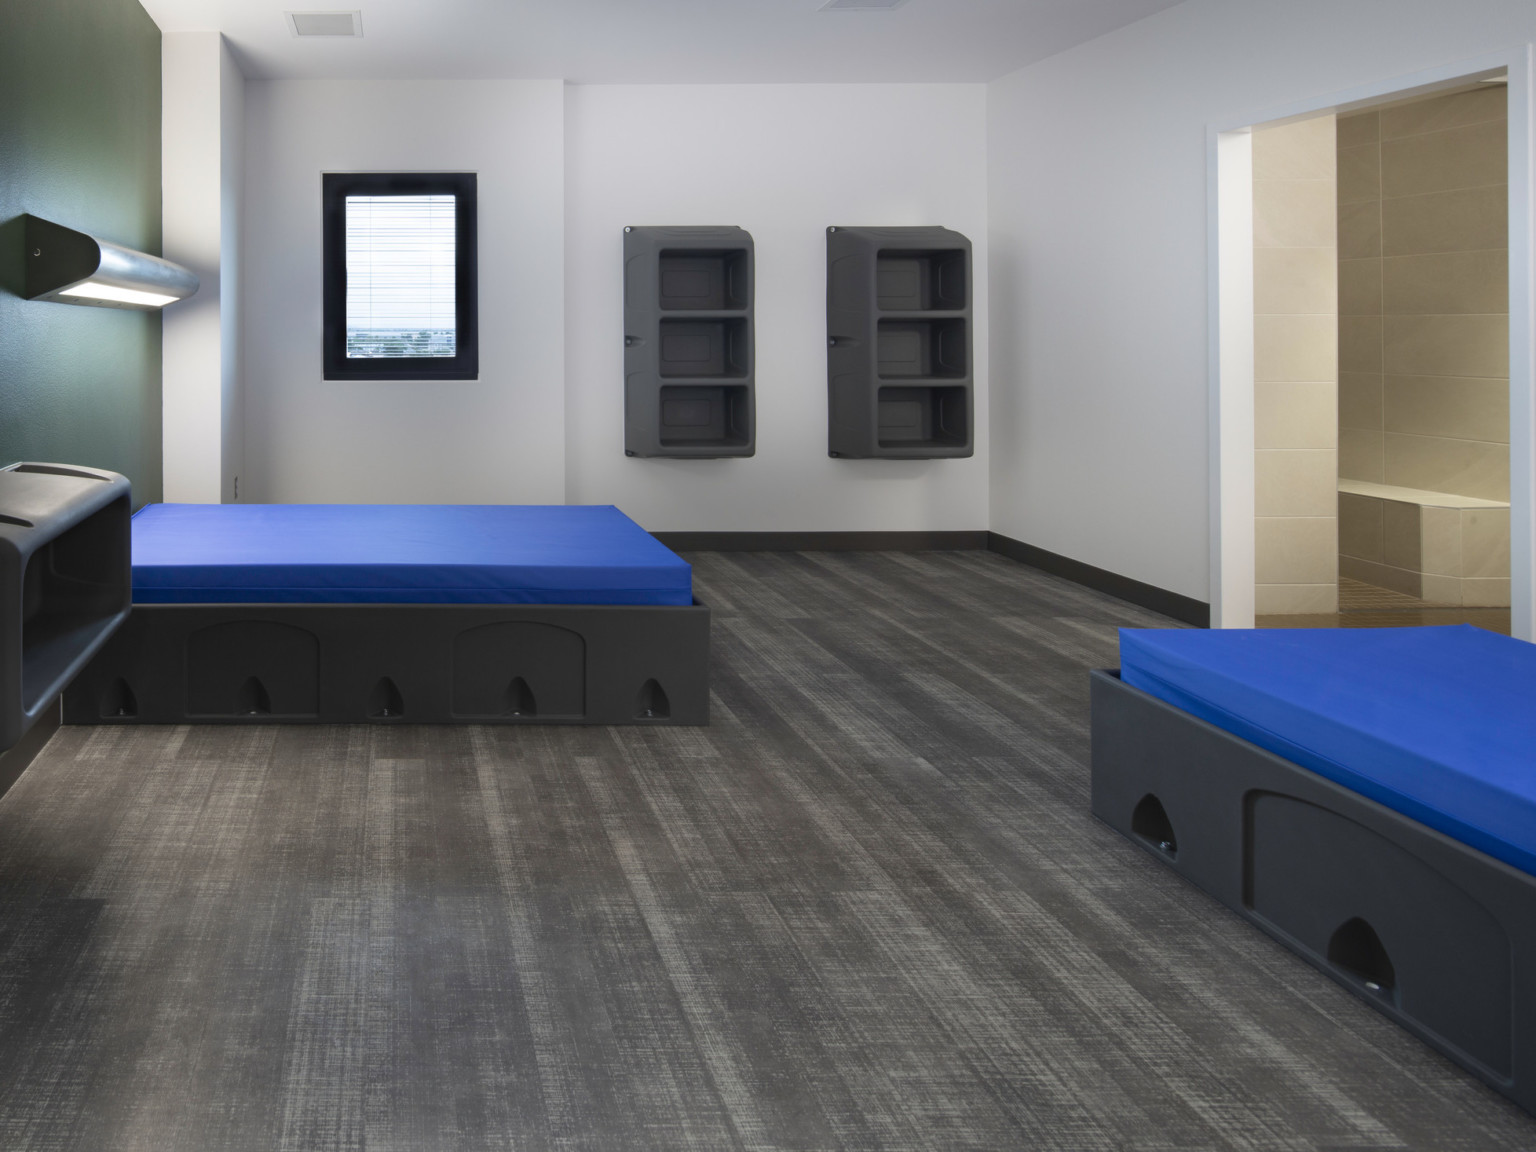 Dark flooring in white room with green accent wall. 2 blue beds on grey bases with light above. Grey shelves on far wall